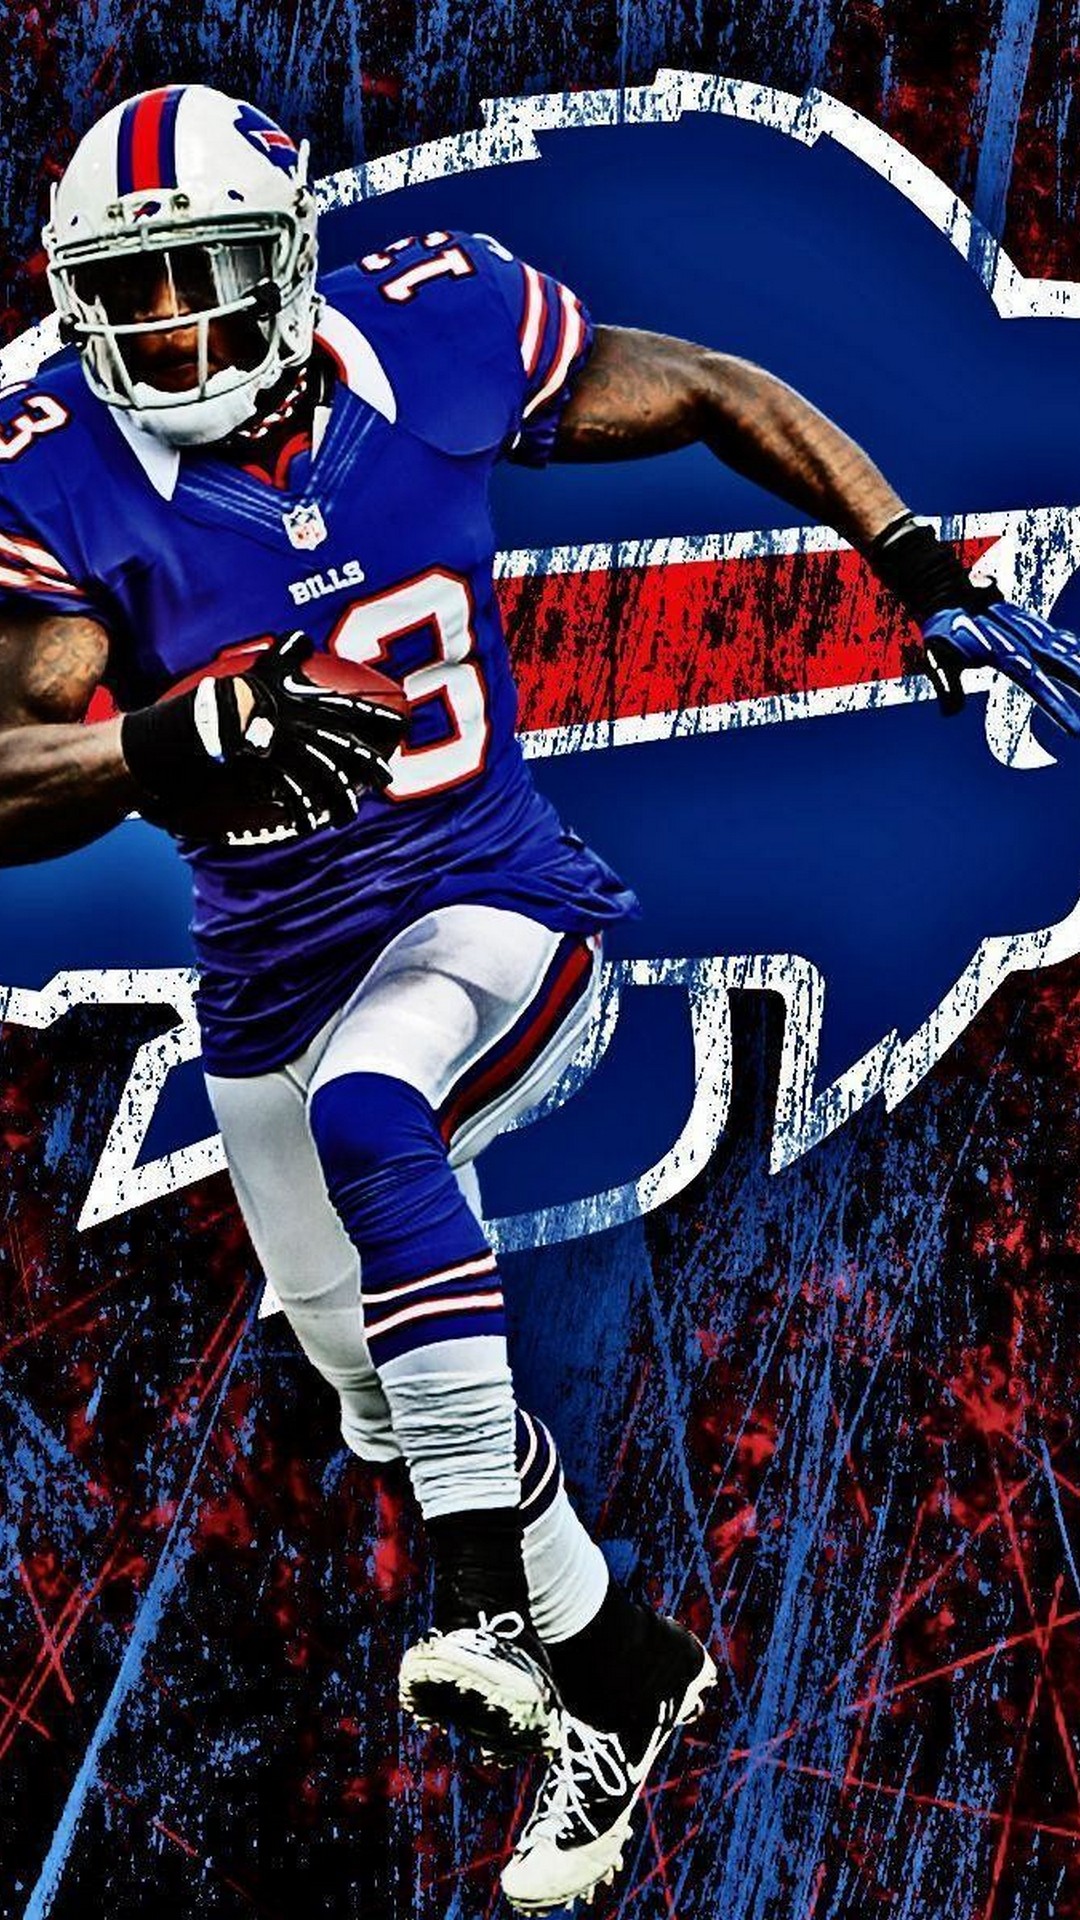 Buffalo Bills iPhone Wallpaper Lock Screen With high-resolution 1080X1920 pixel. Download and set as wallpaper for Apple iPhone X, XS Max, XR, 8, 7, 6, SE, iPad, Android